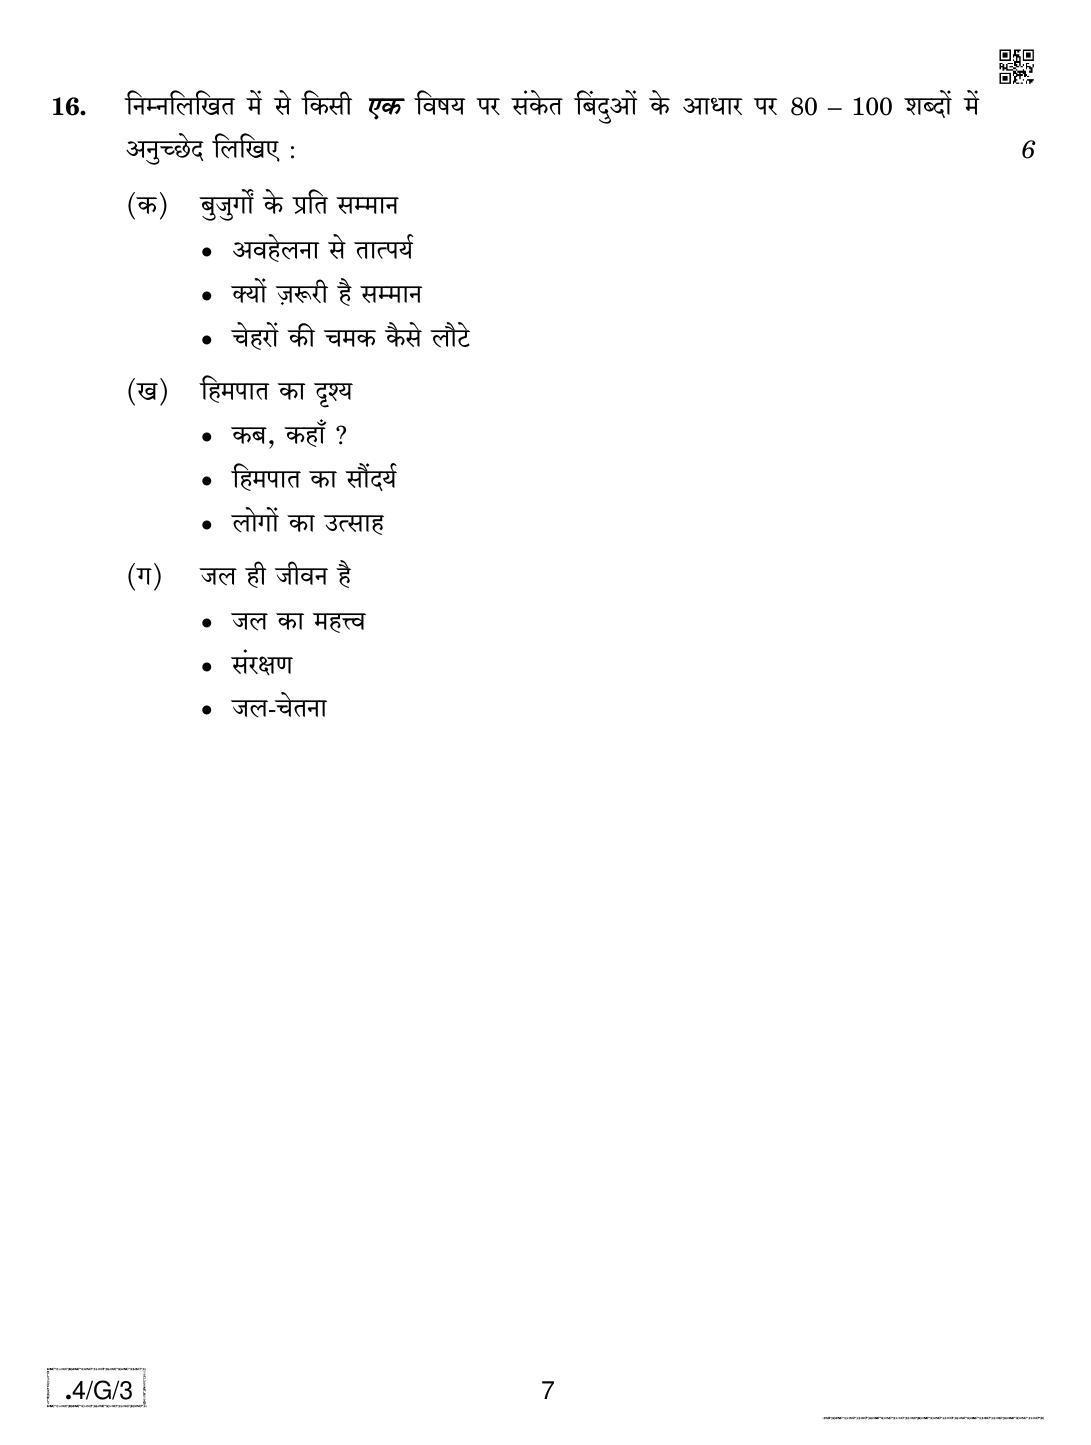 CBSE Class 10 4-C-3 Hindi B 2020 Compartment Question Paper - Page 7